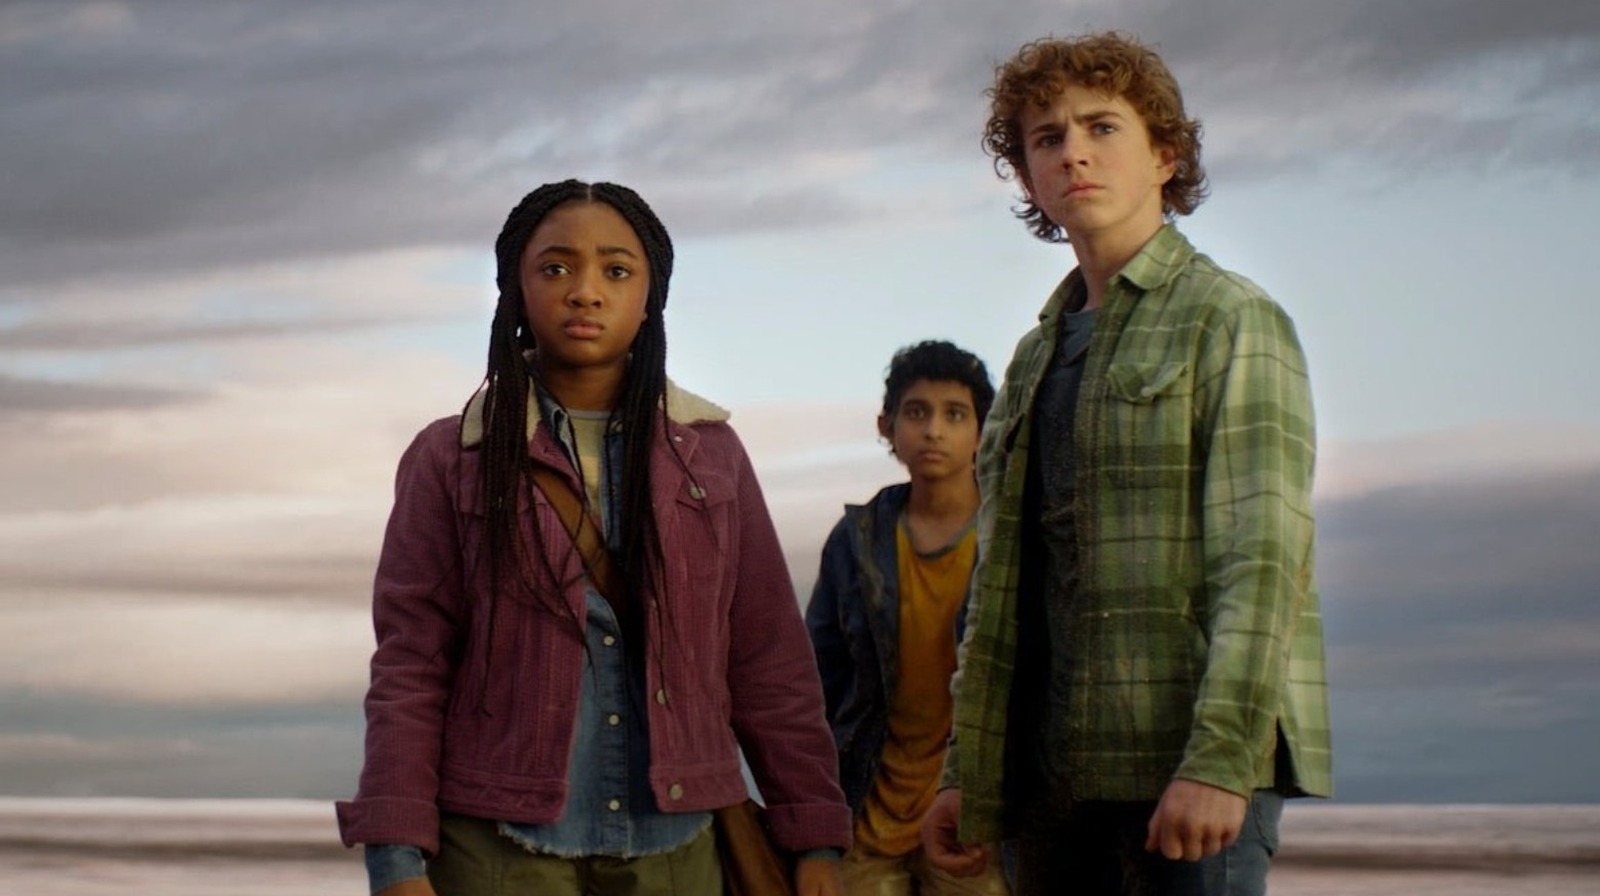 Percy Jackson And The Olympians Trailer Brings The Beloved Fantasy Books To Disney+